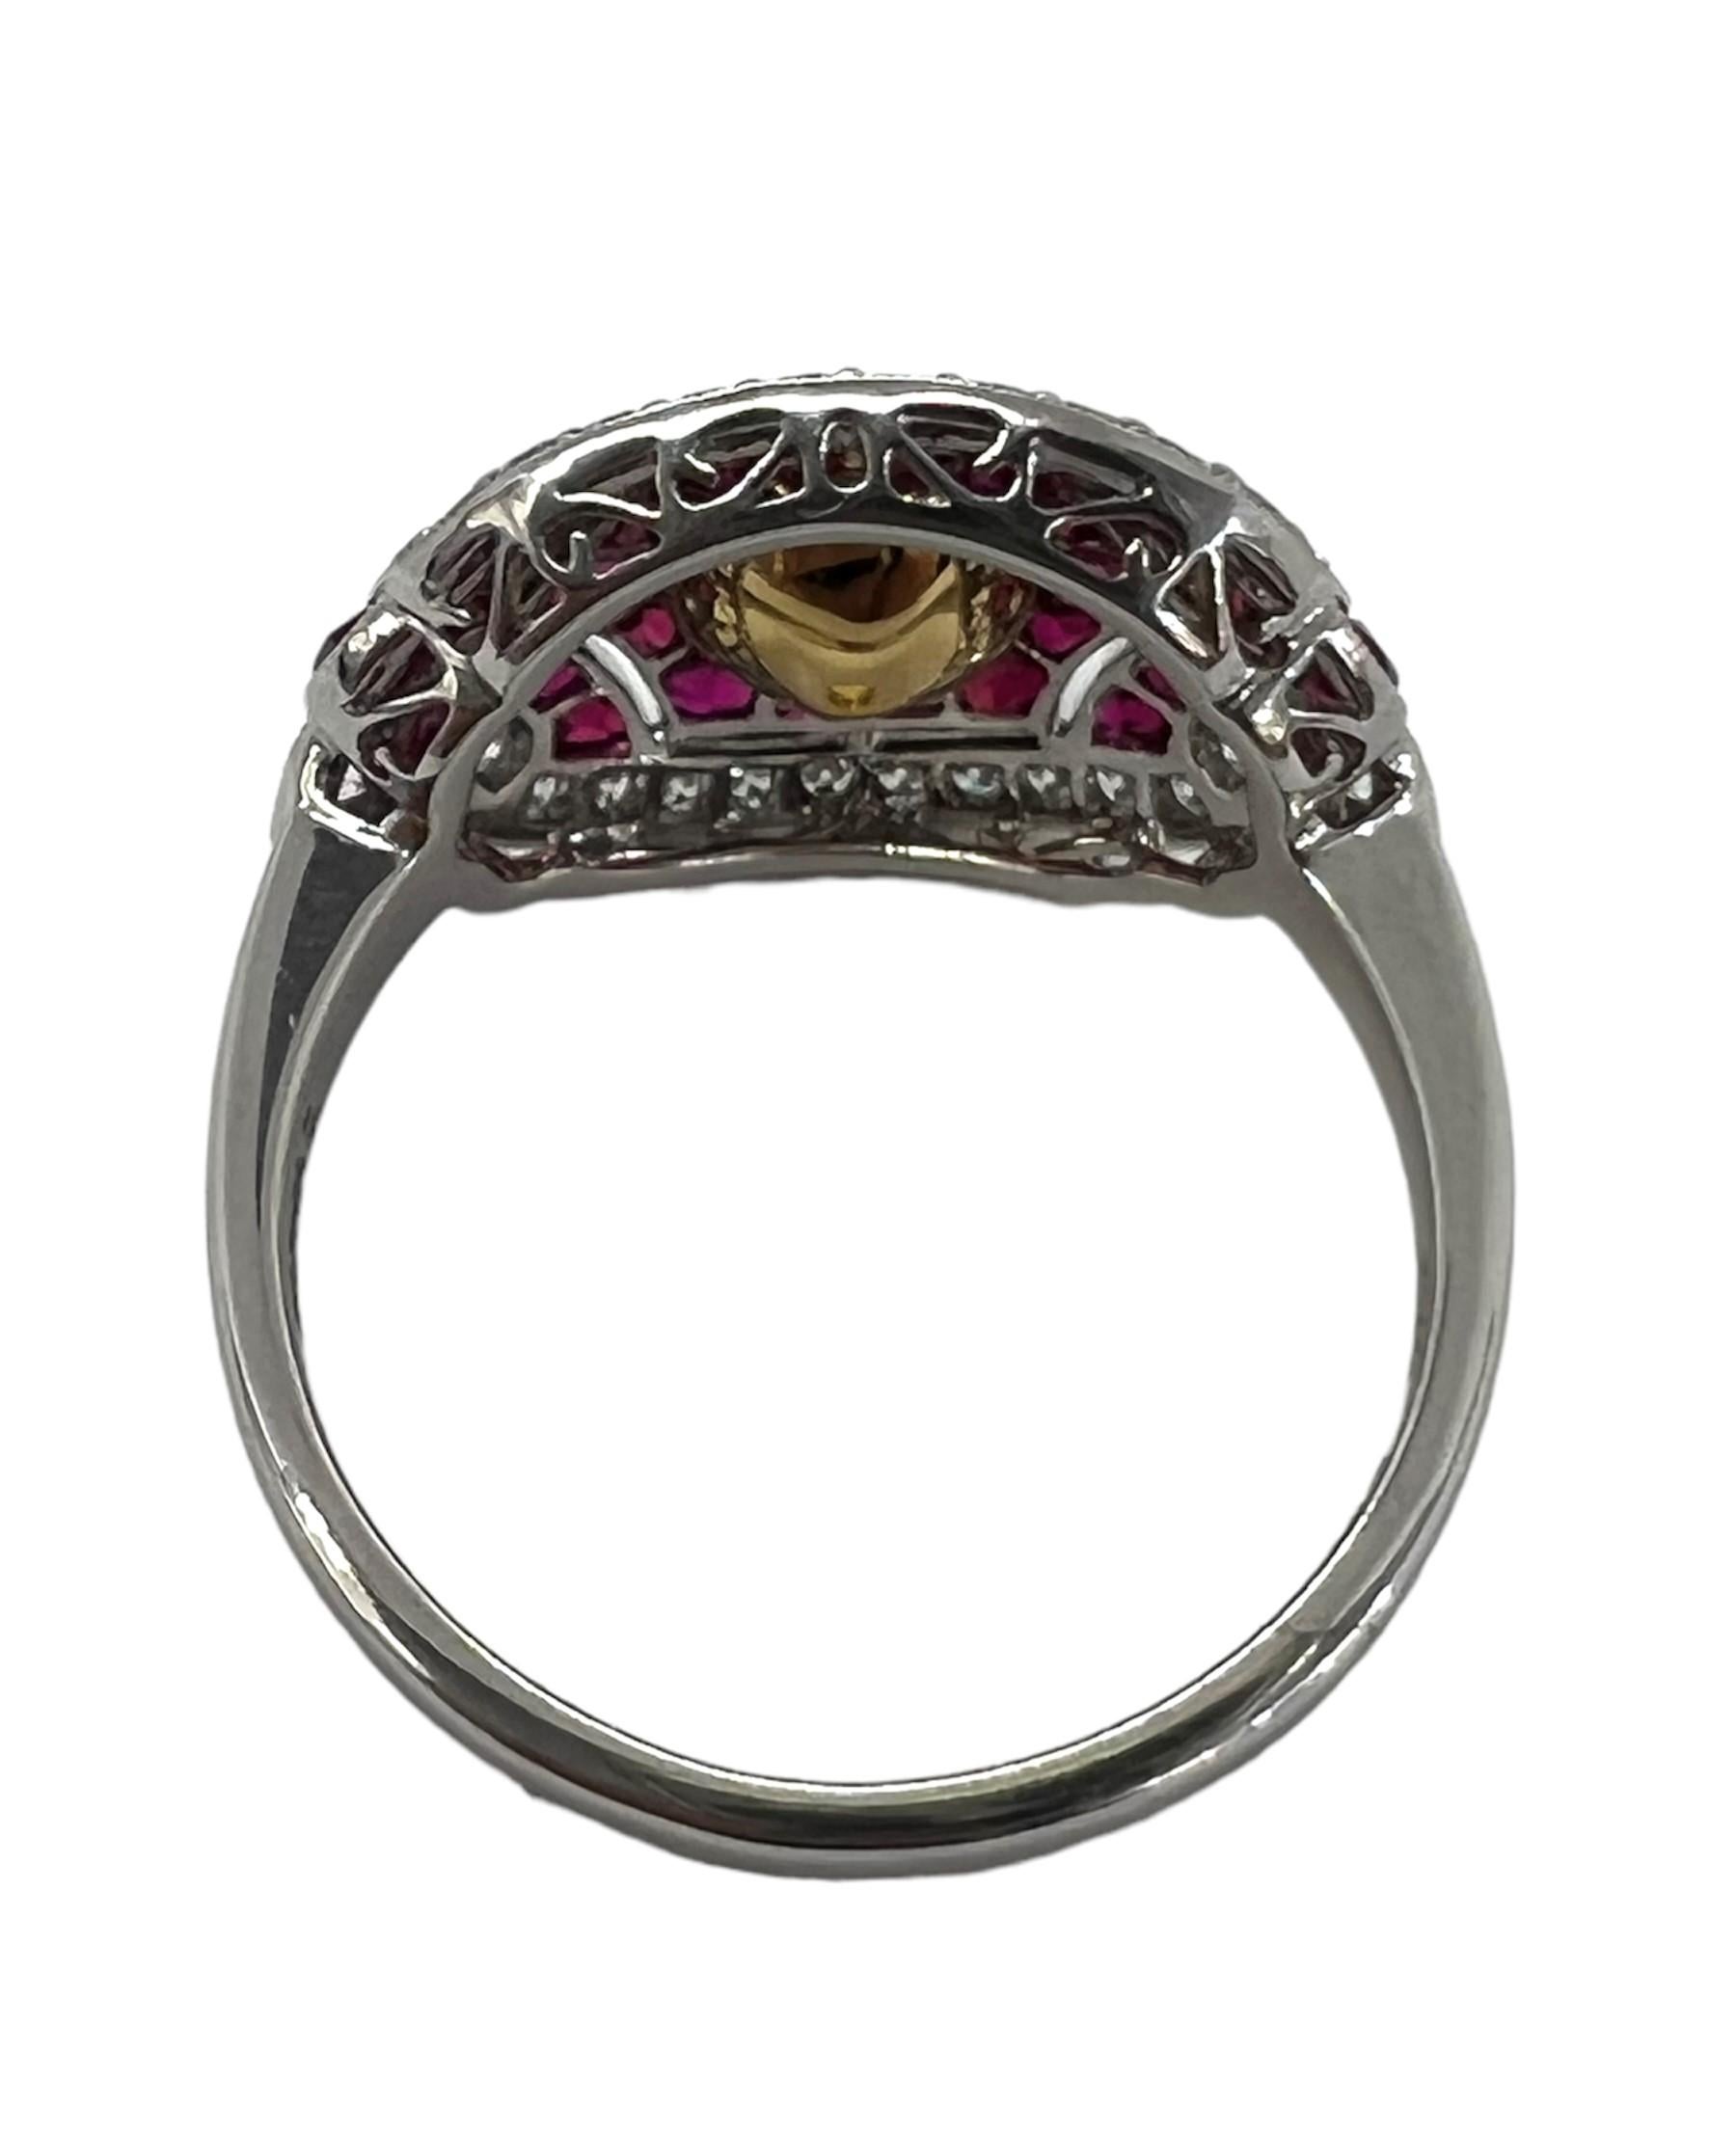 Round Cut Sophia D, 0.81 Carat Yellow Diamond and 1.25 Carat Ruby Ring set in Platinum For Sale